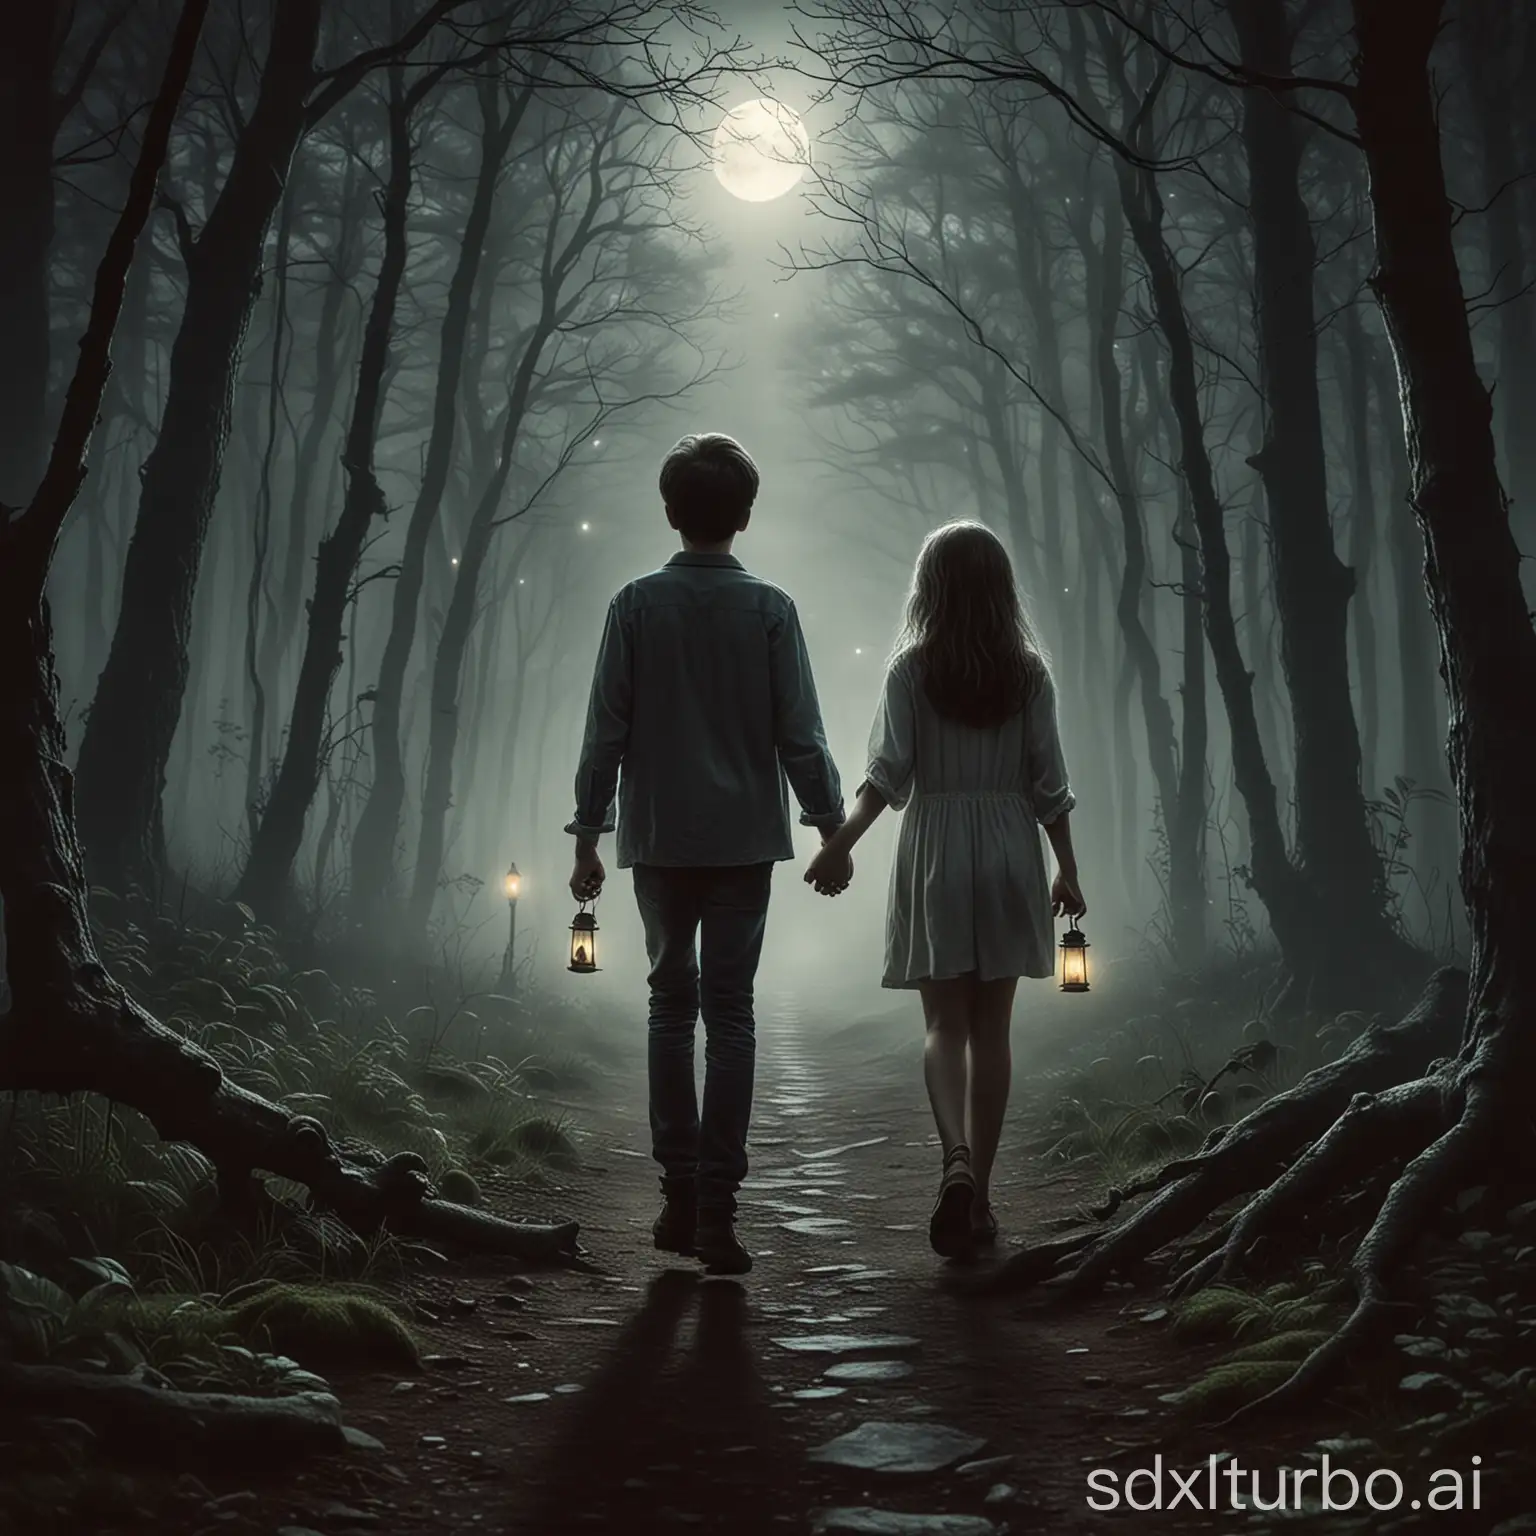 make me a book cover where we can see a boy and a girl. The boy has a lamp in his hand. The girl is sick, she is in bad shape, the two are holding hands, they are facing us. They are in a mysterious forest, there is mist. It's night, we see a full moon.